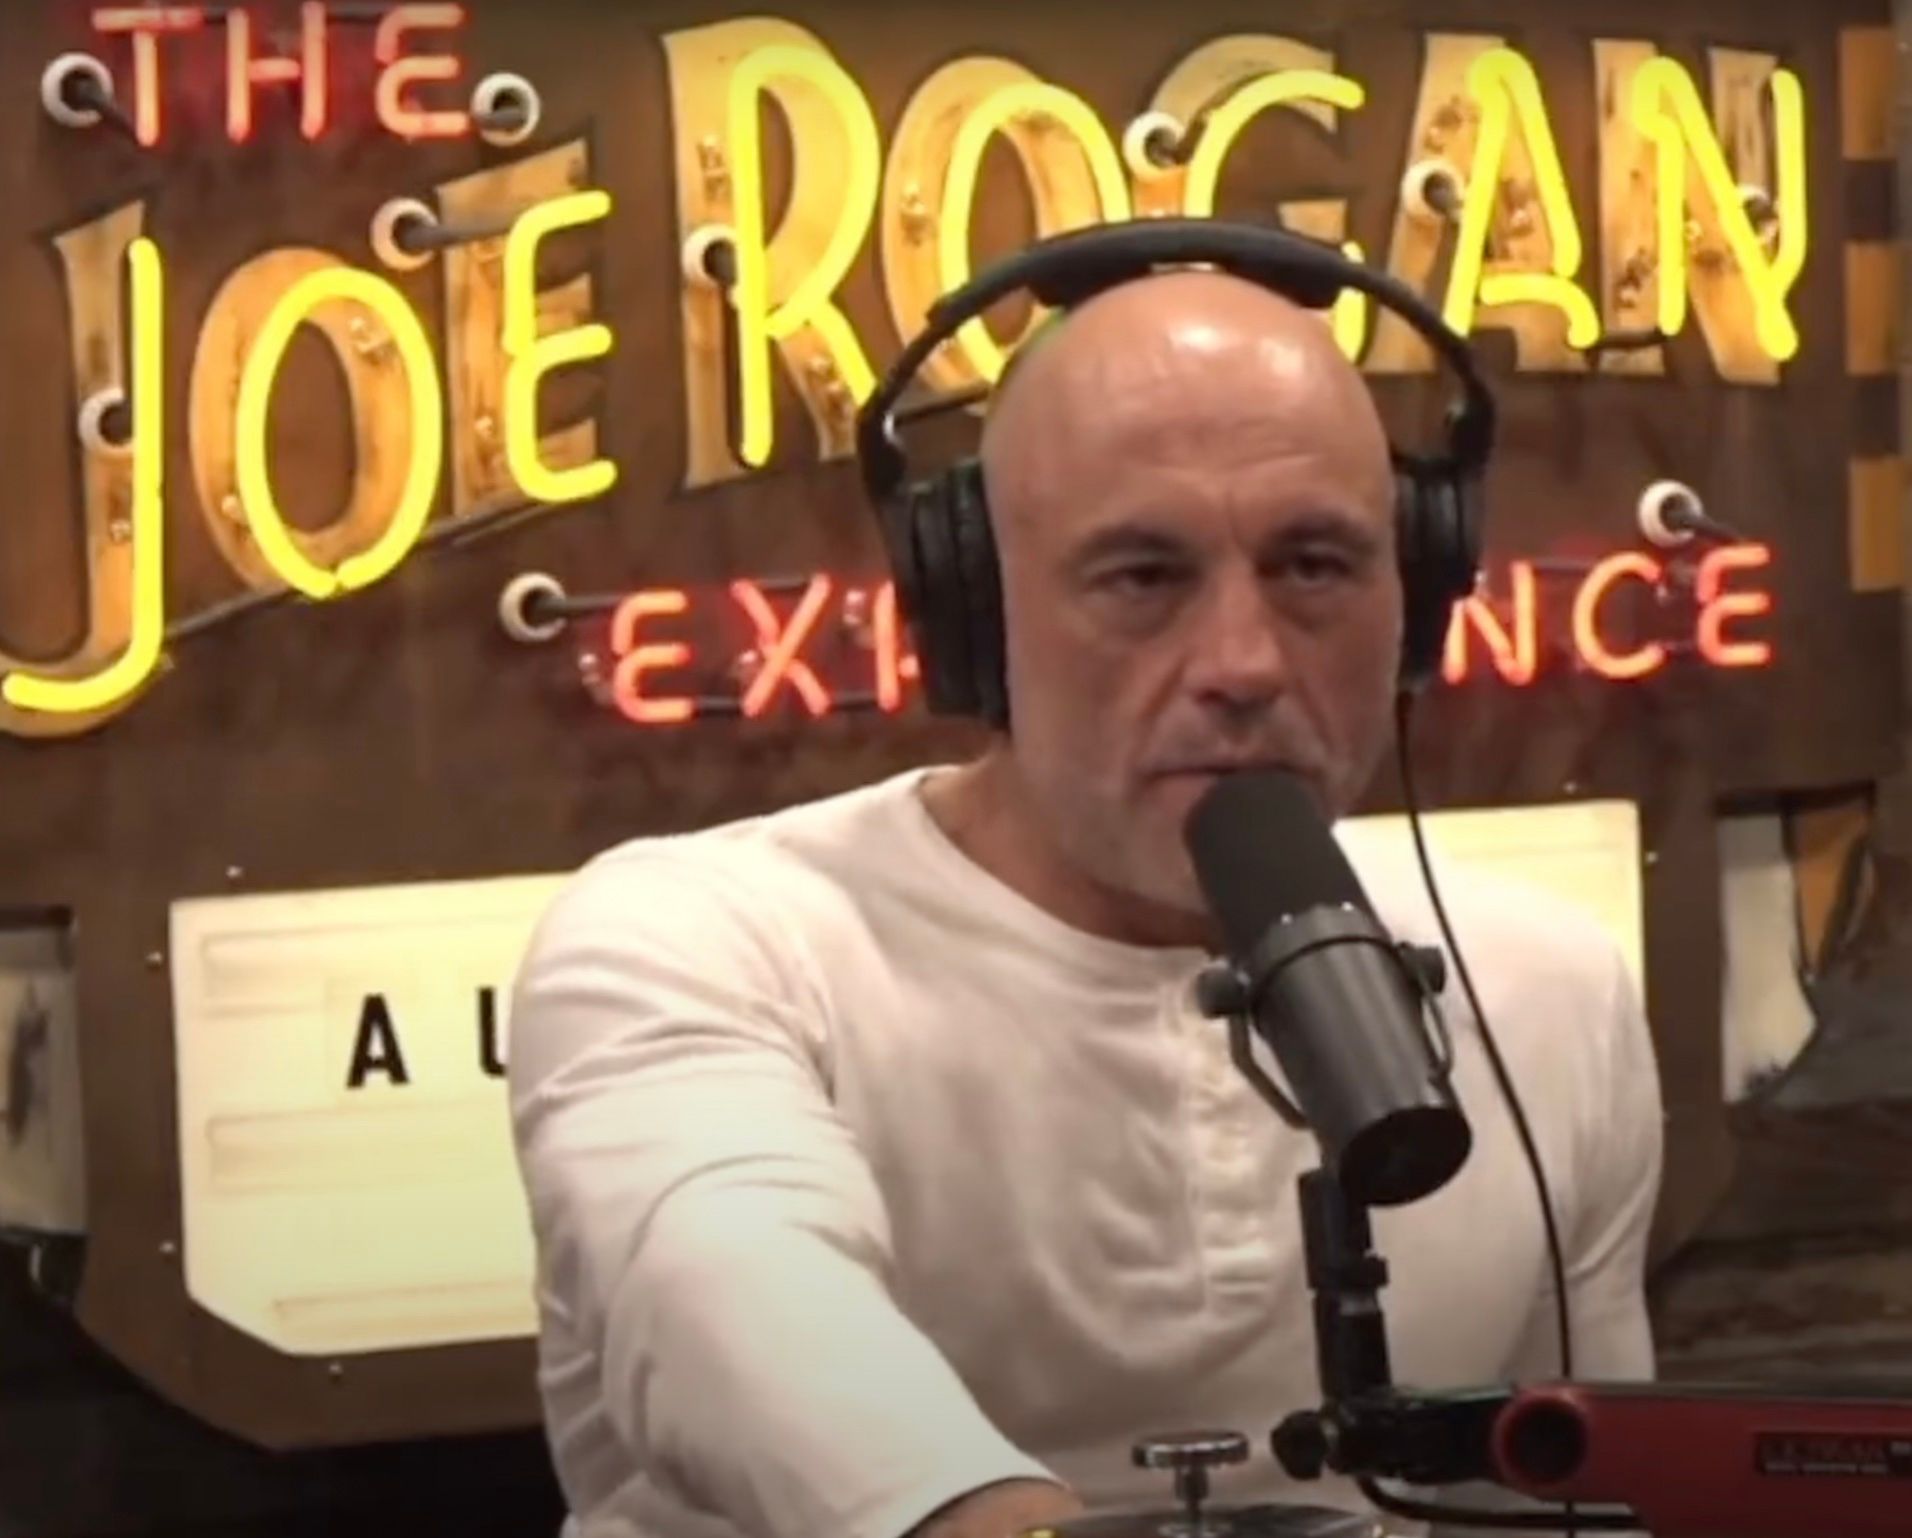 Oliver Anthony Goes On Joe Rogan Experience and Reads Proverbs 4:20